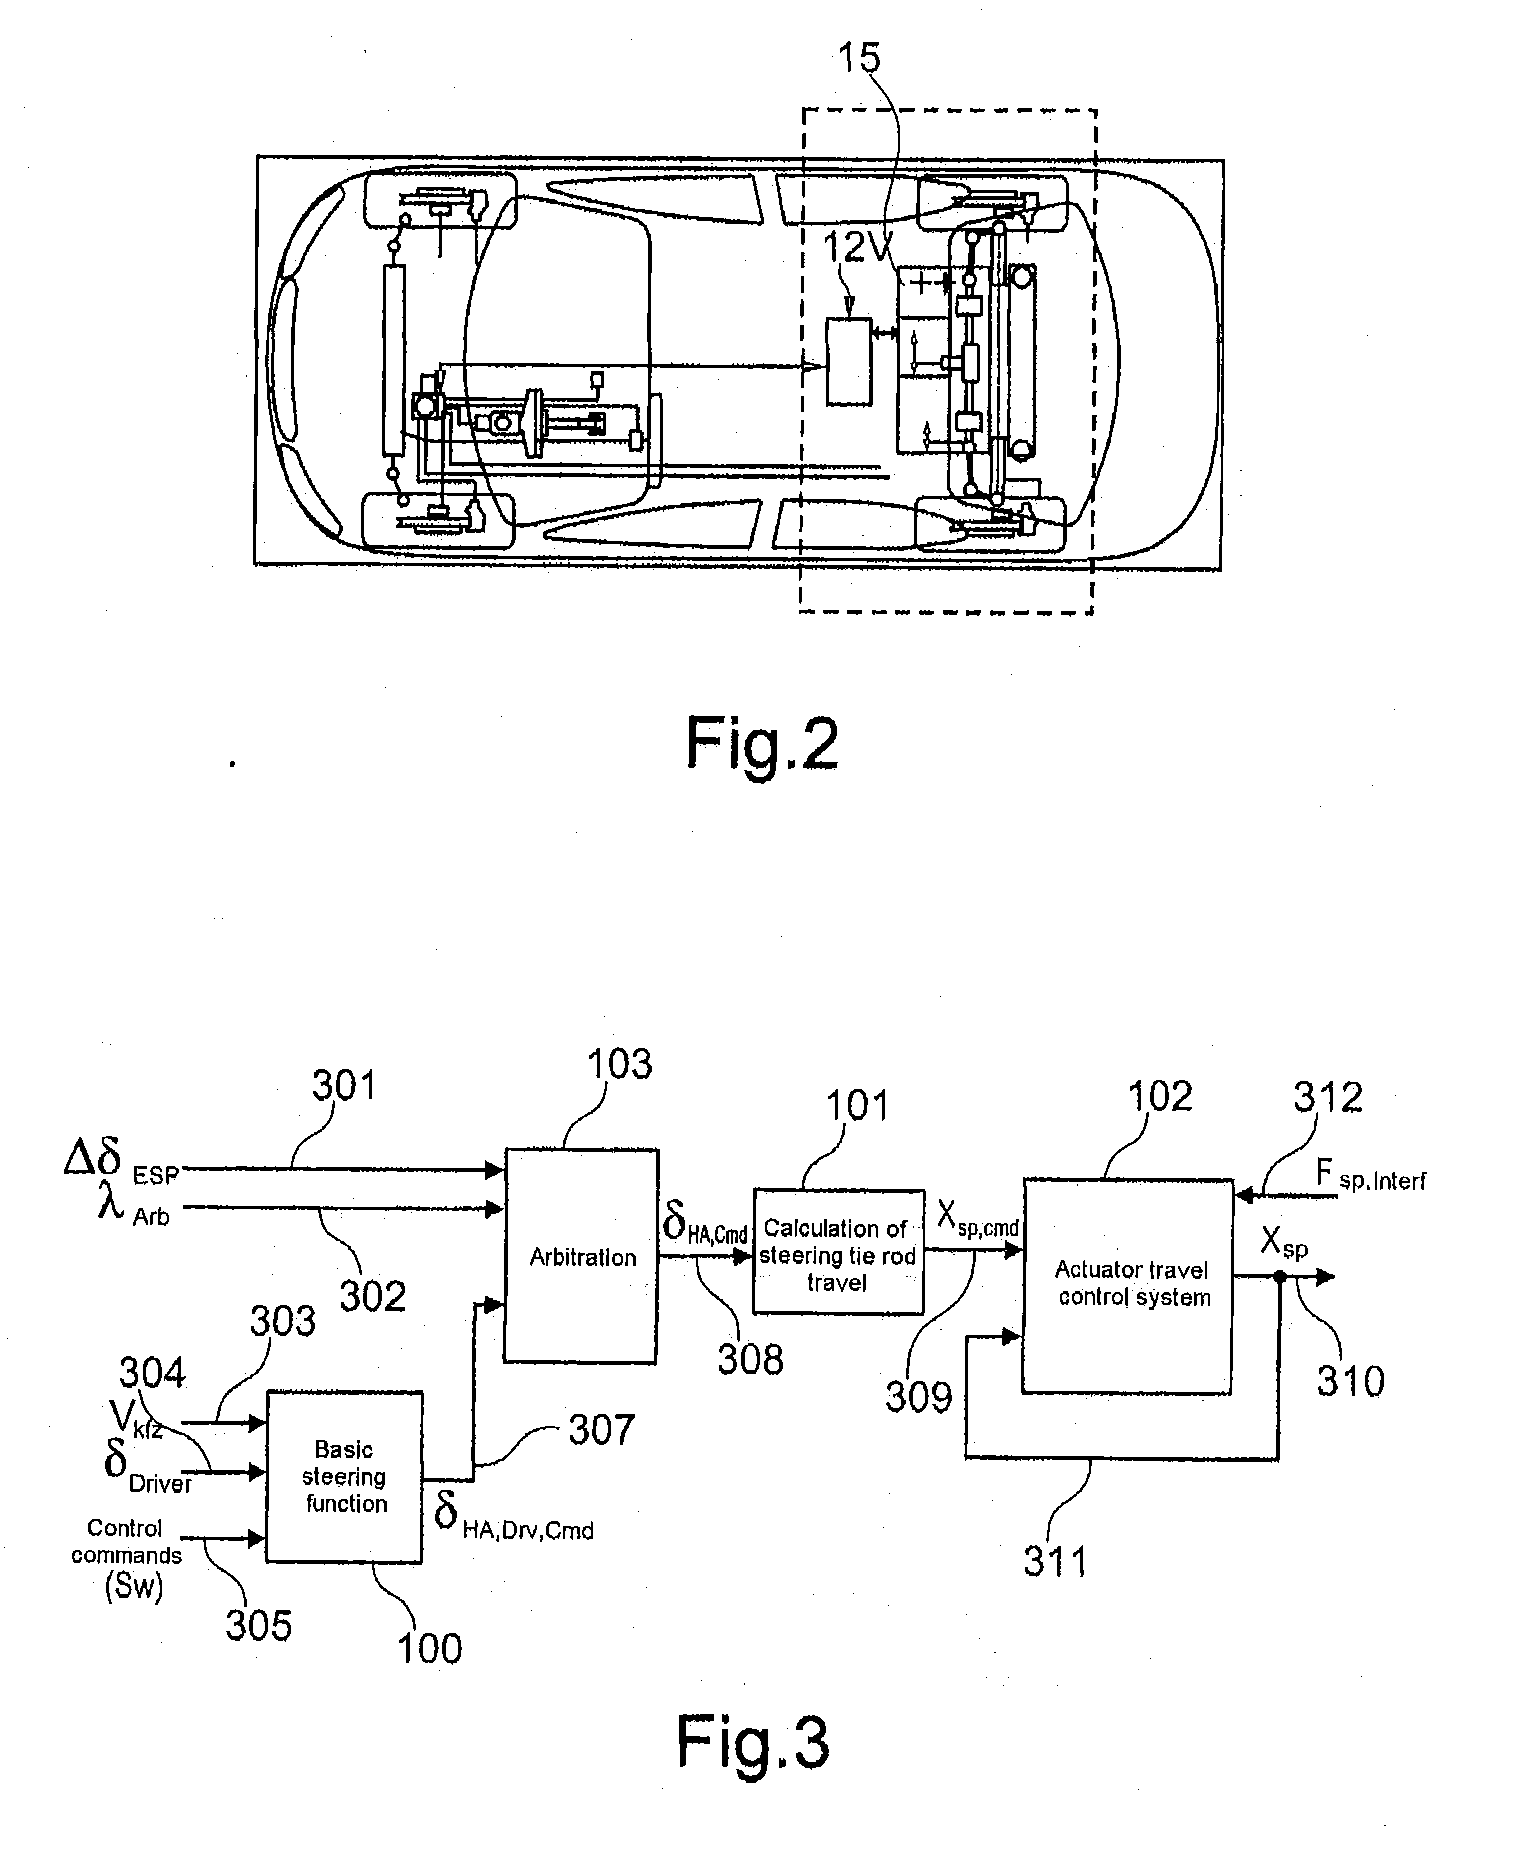 Steering device for adjusting a wheel steering angle